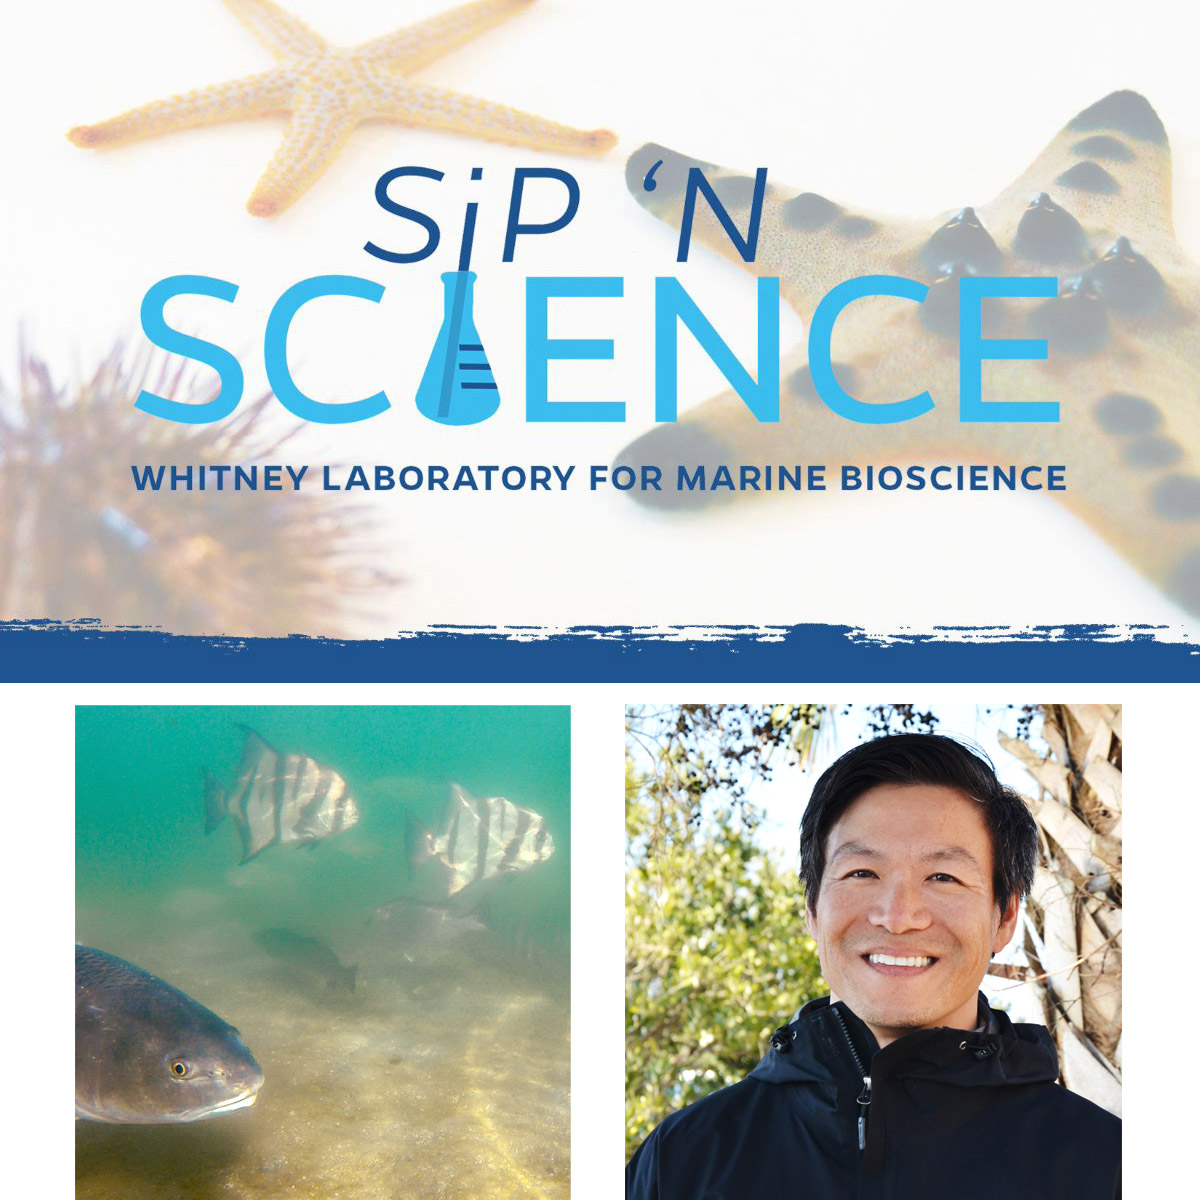 Sip 'N Science YouTube link with Dr. James Liao